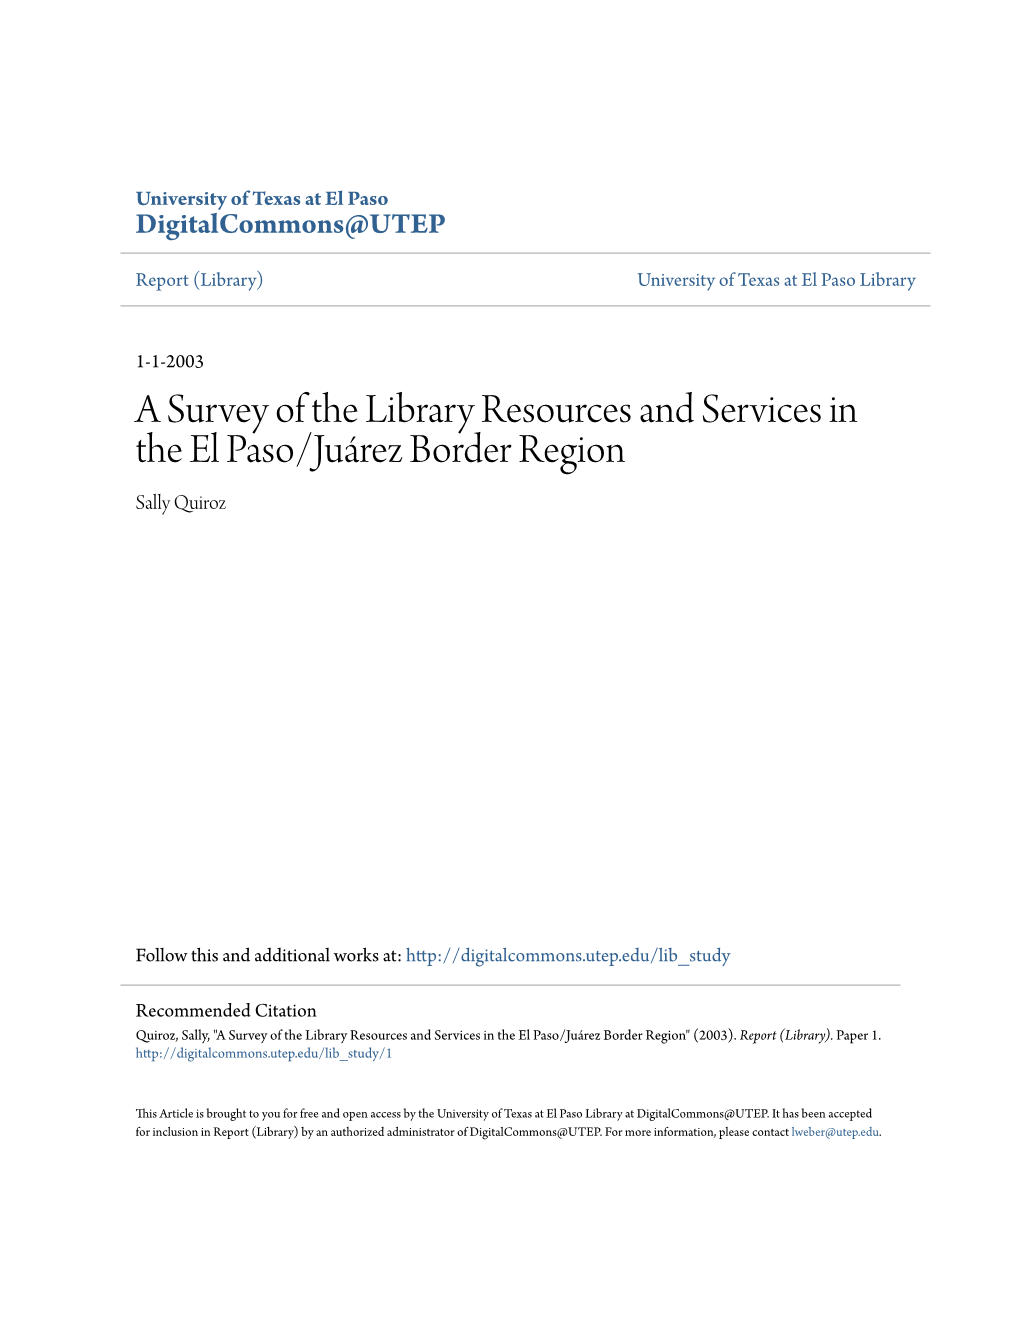 A Survey of the Library Resources and Services in the El Paso/Juárez Border Region Sally Quiroz